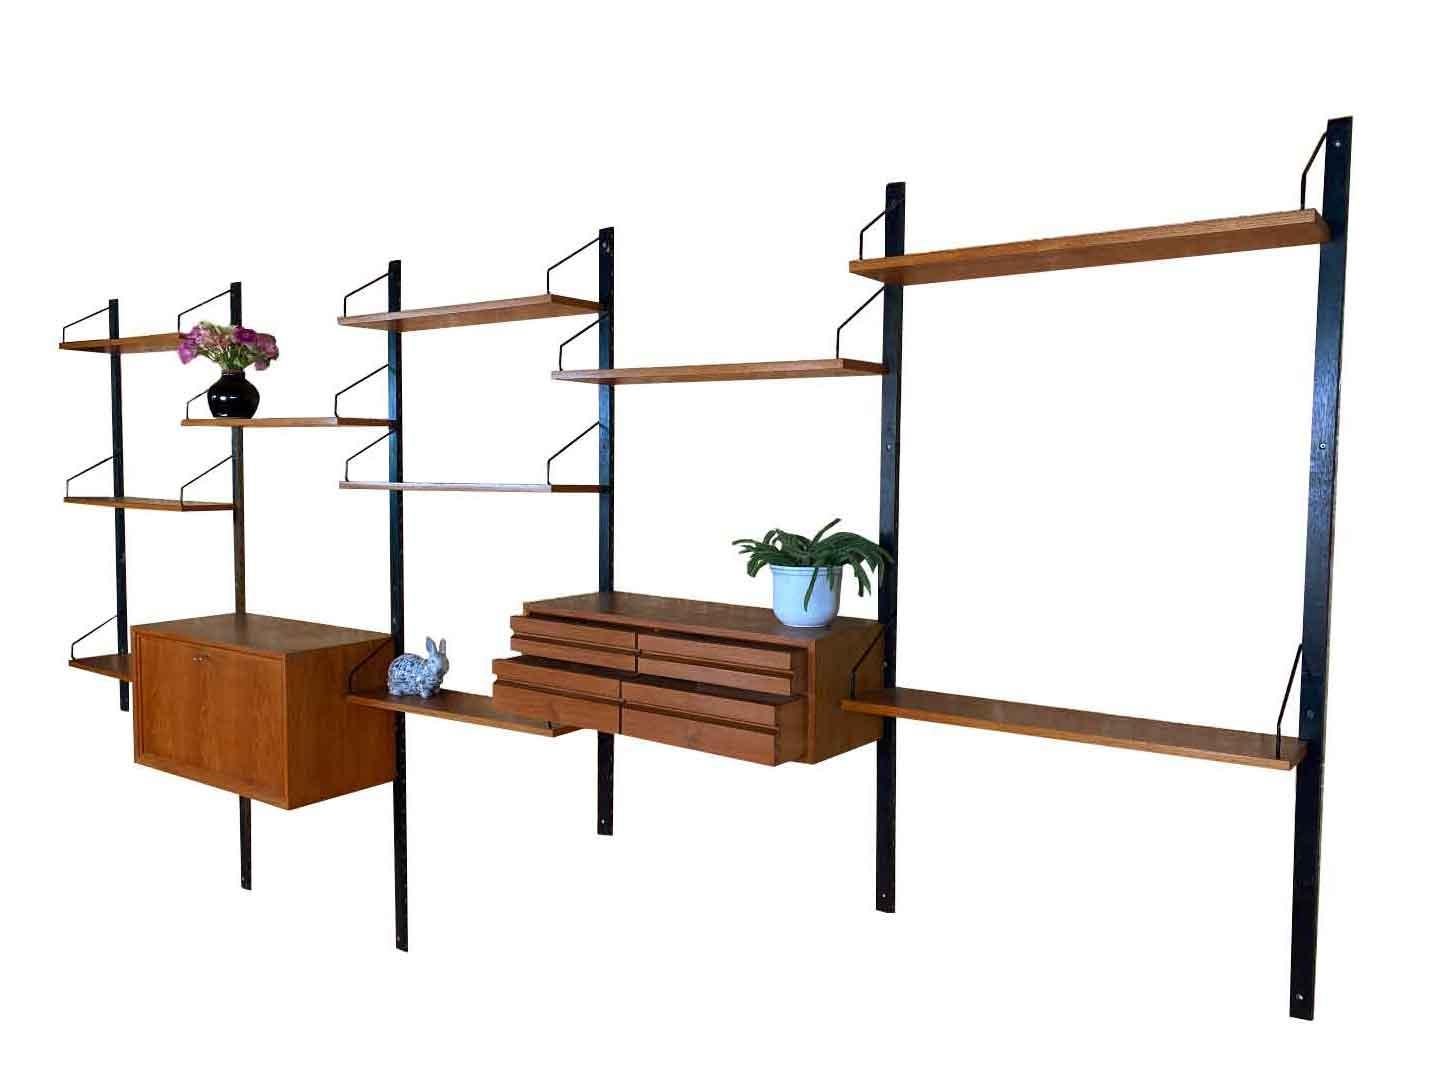 5 piece vintage wall system designed in 1948 by the Danish designer Poul Cadovius. The royal system has been brought at Cado Denmark. The wall system is made in teak and consists of a chair with 4 drawers, a storage cabinet with valve and shelves.